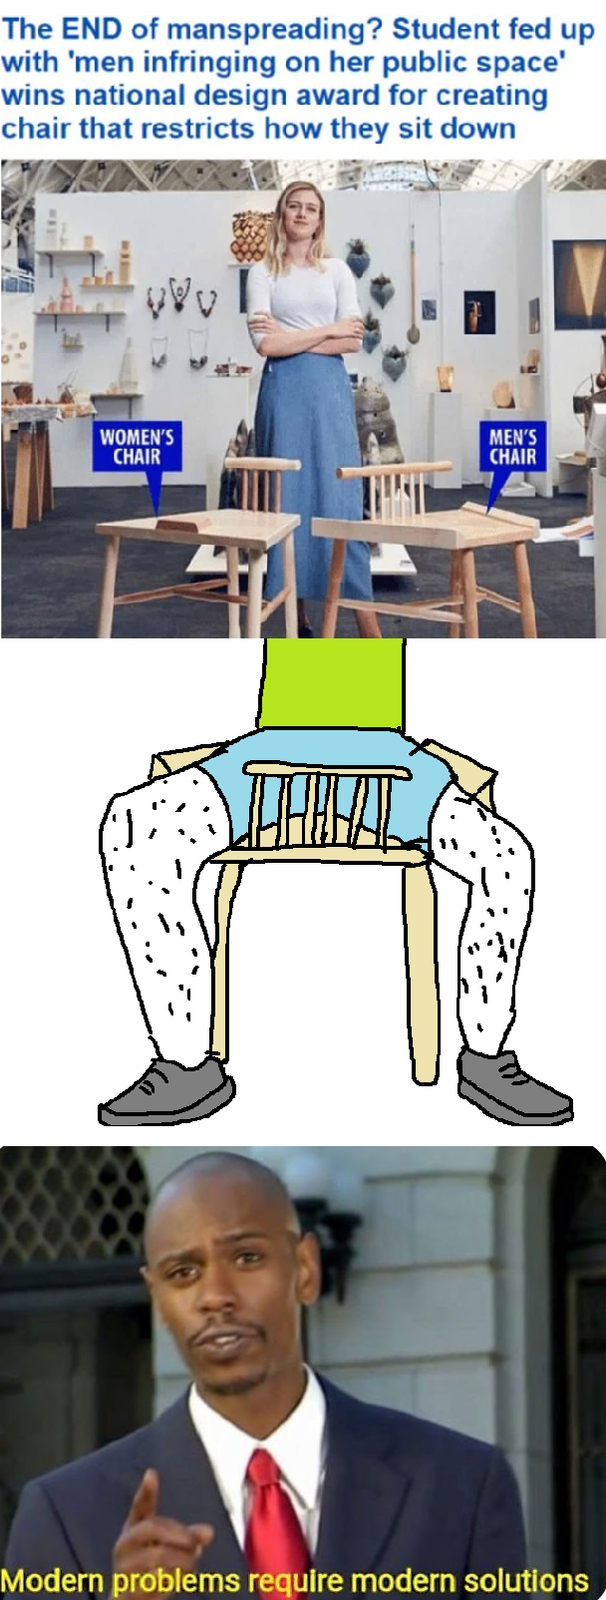 meme - The End of manspreading? Student fed up with 'men infringing on her public space wins national design award for creating chair that restricts how they sit down Modern problems require modern solutions